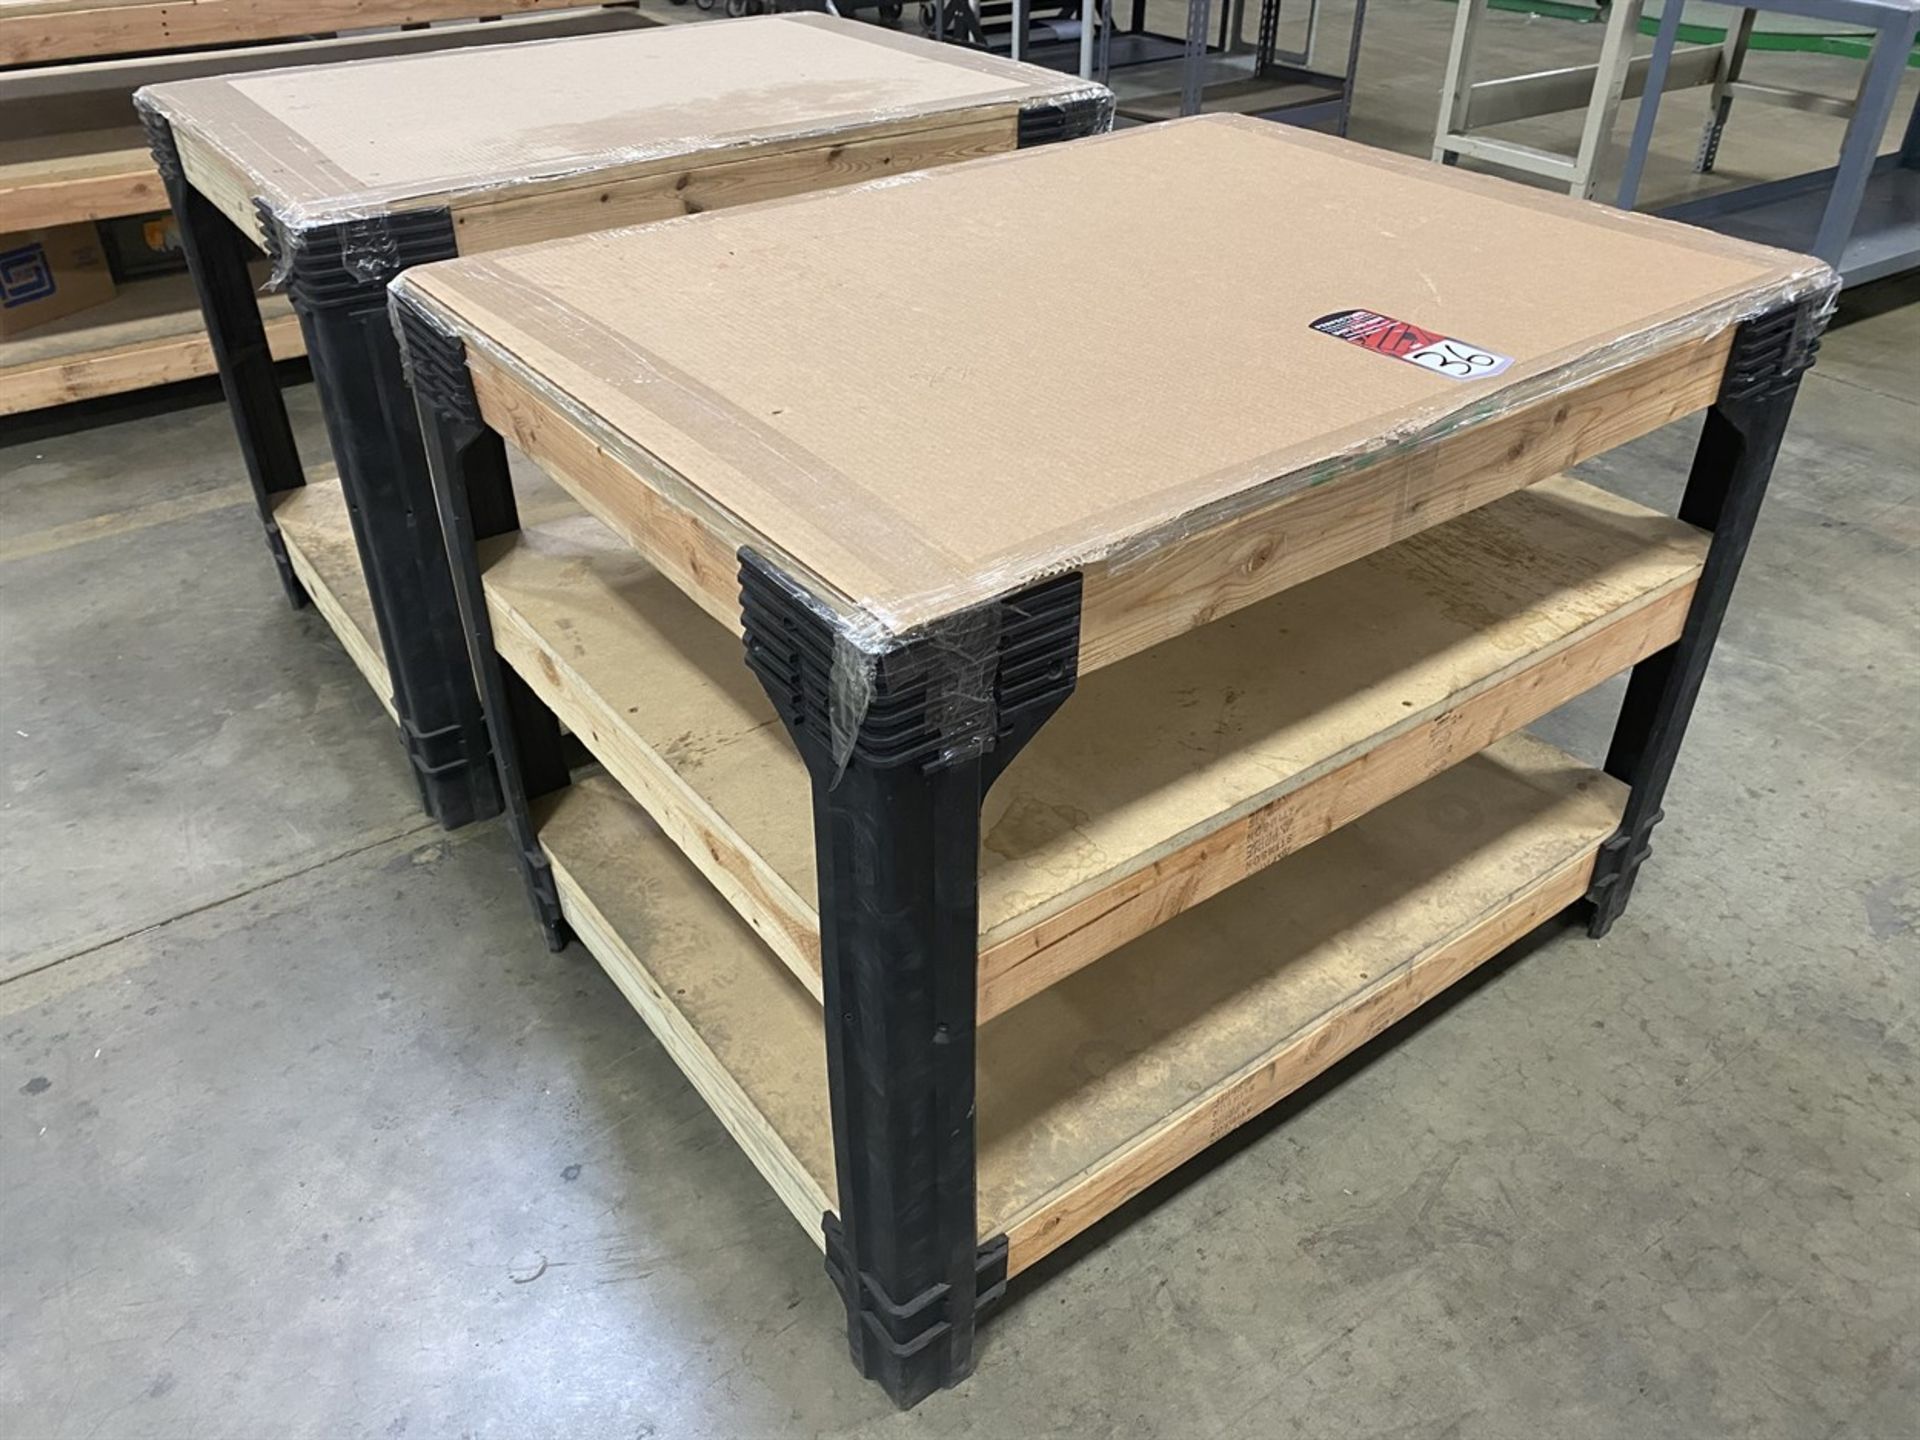 Lot of (2) Work Benches, 36" x 48"